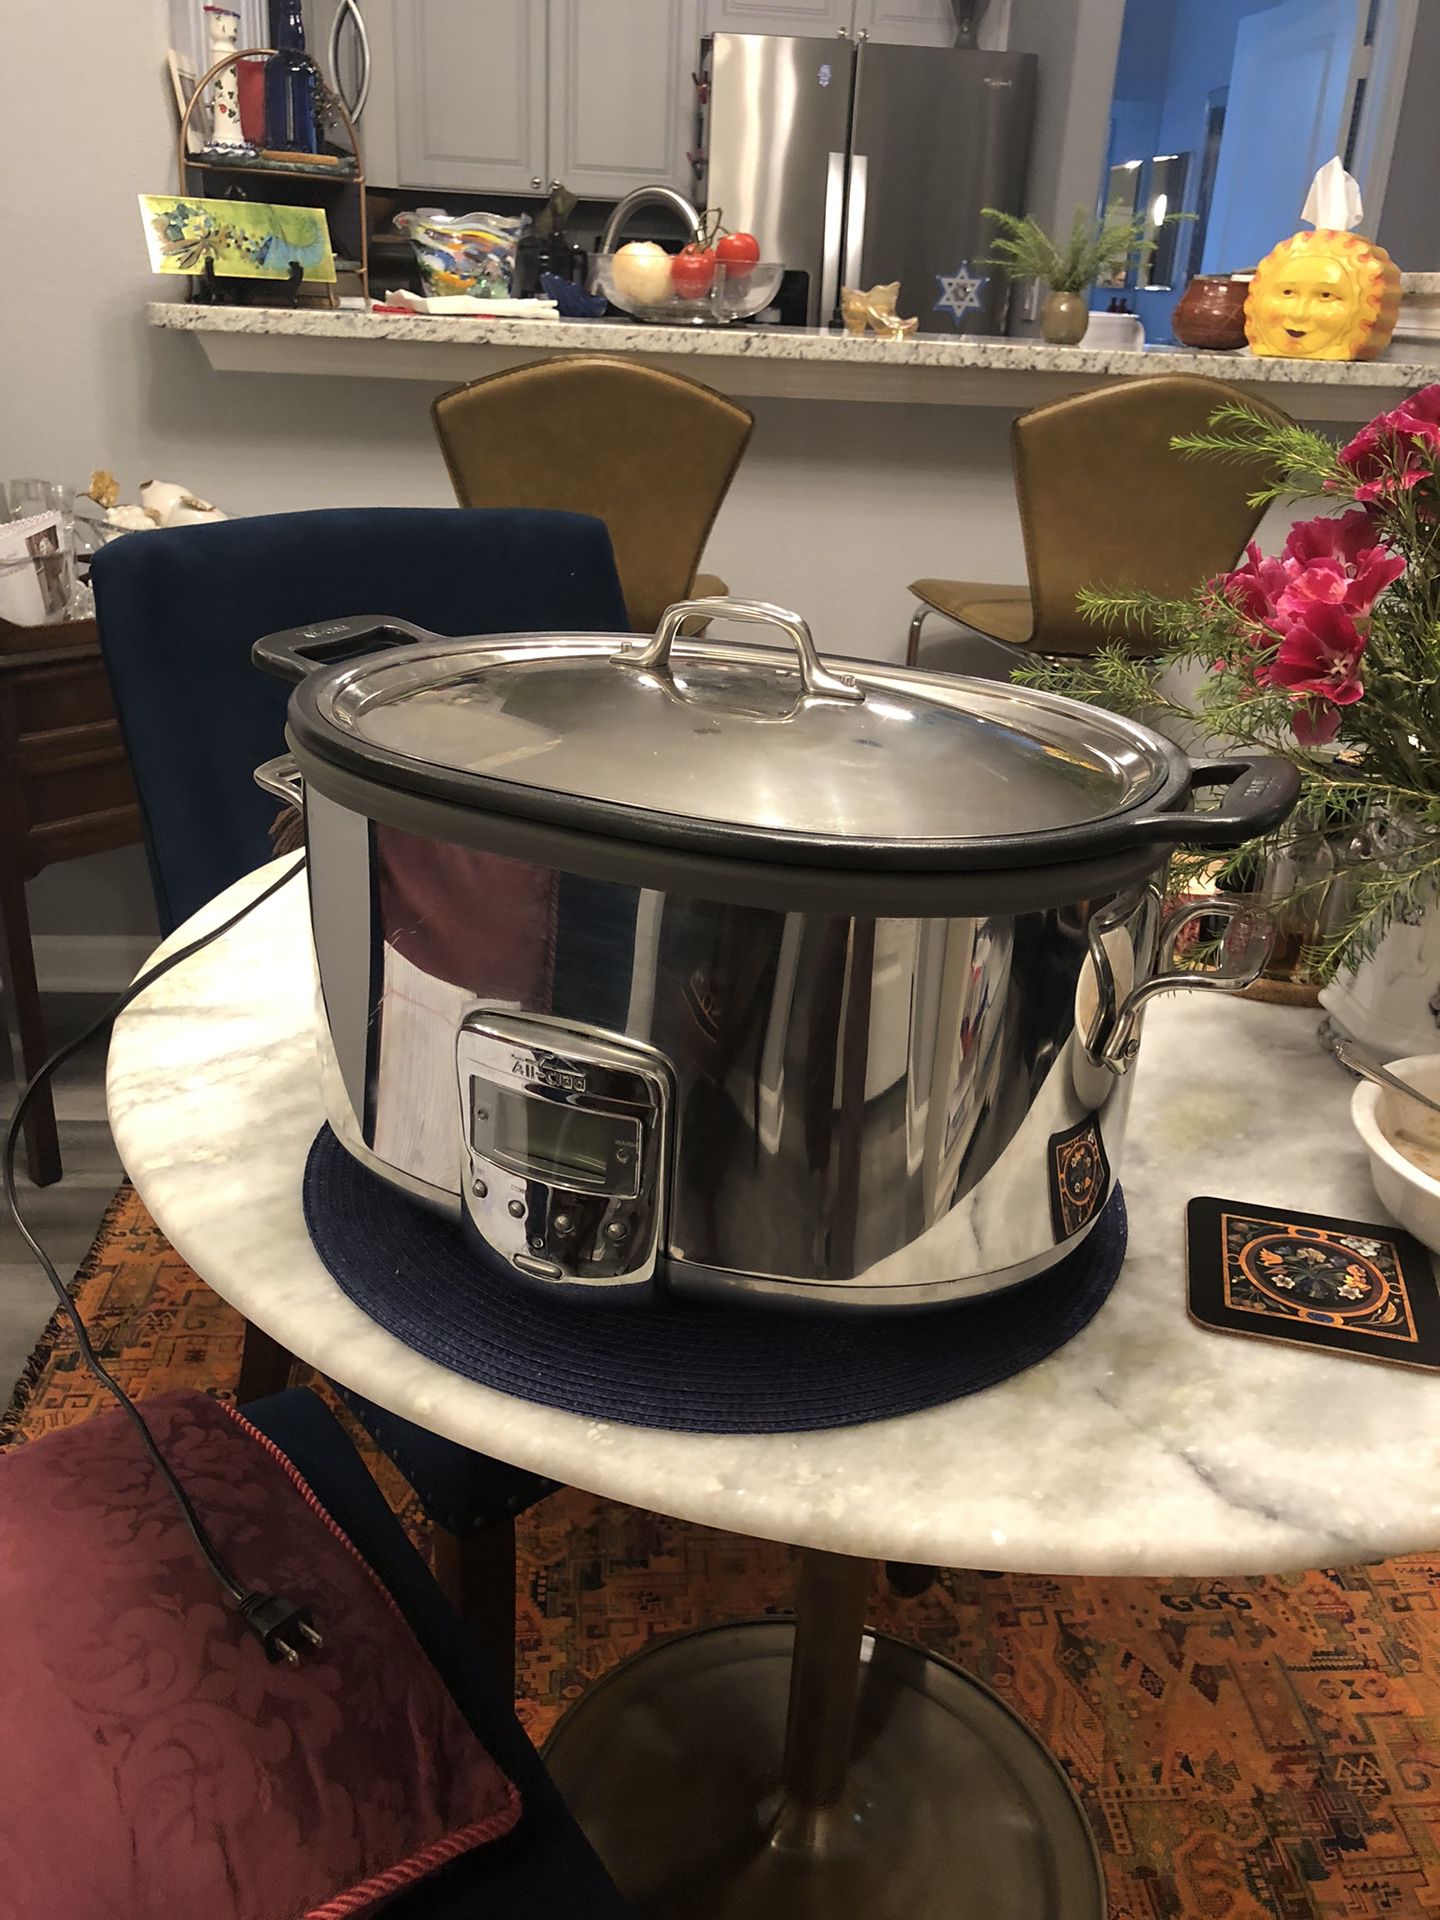 All-Clad 8-Qt Stainless Steel Slow Cooker